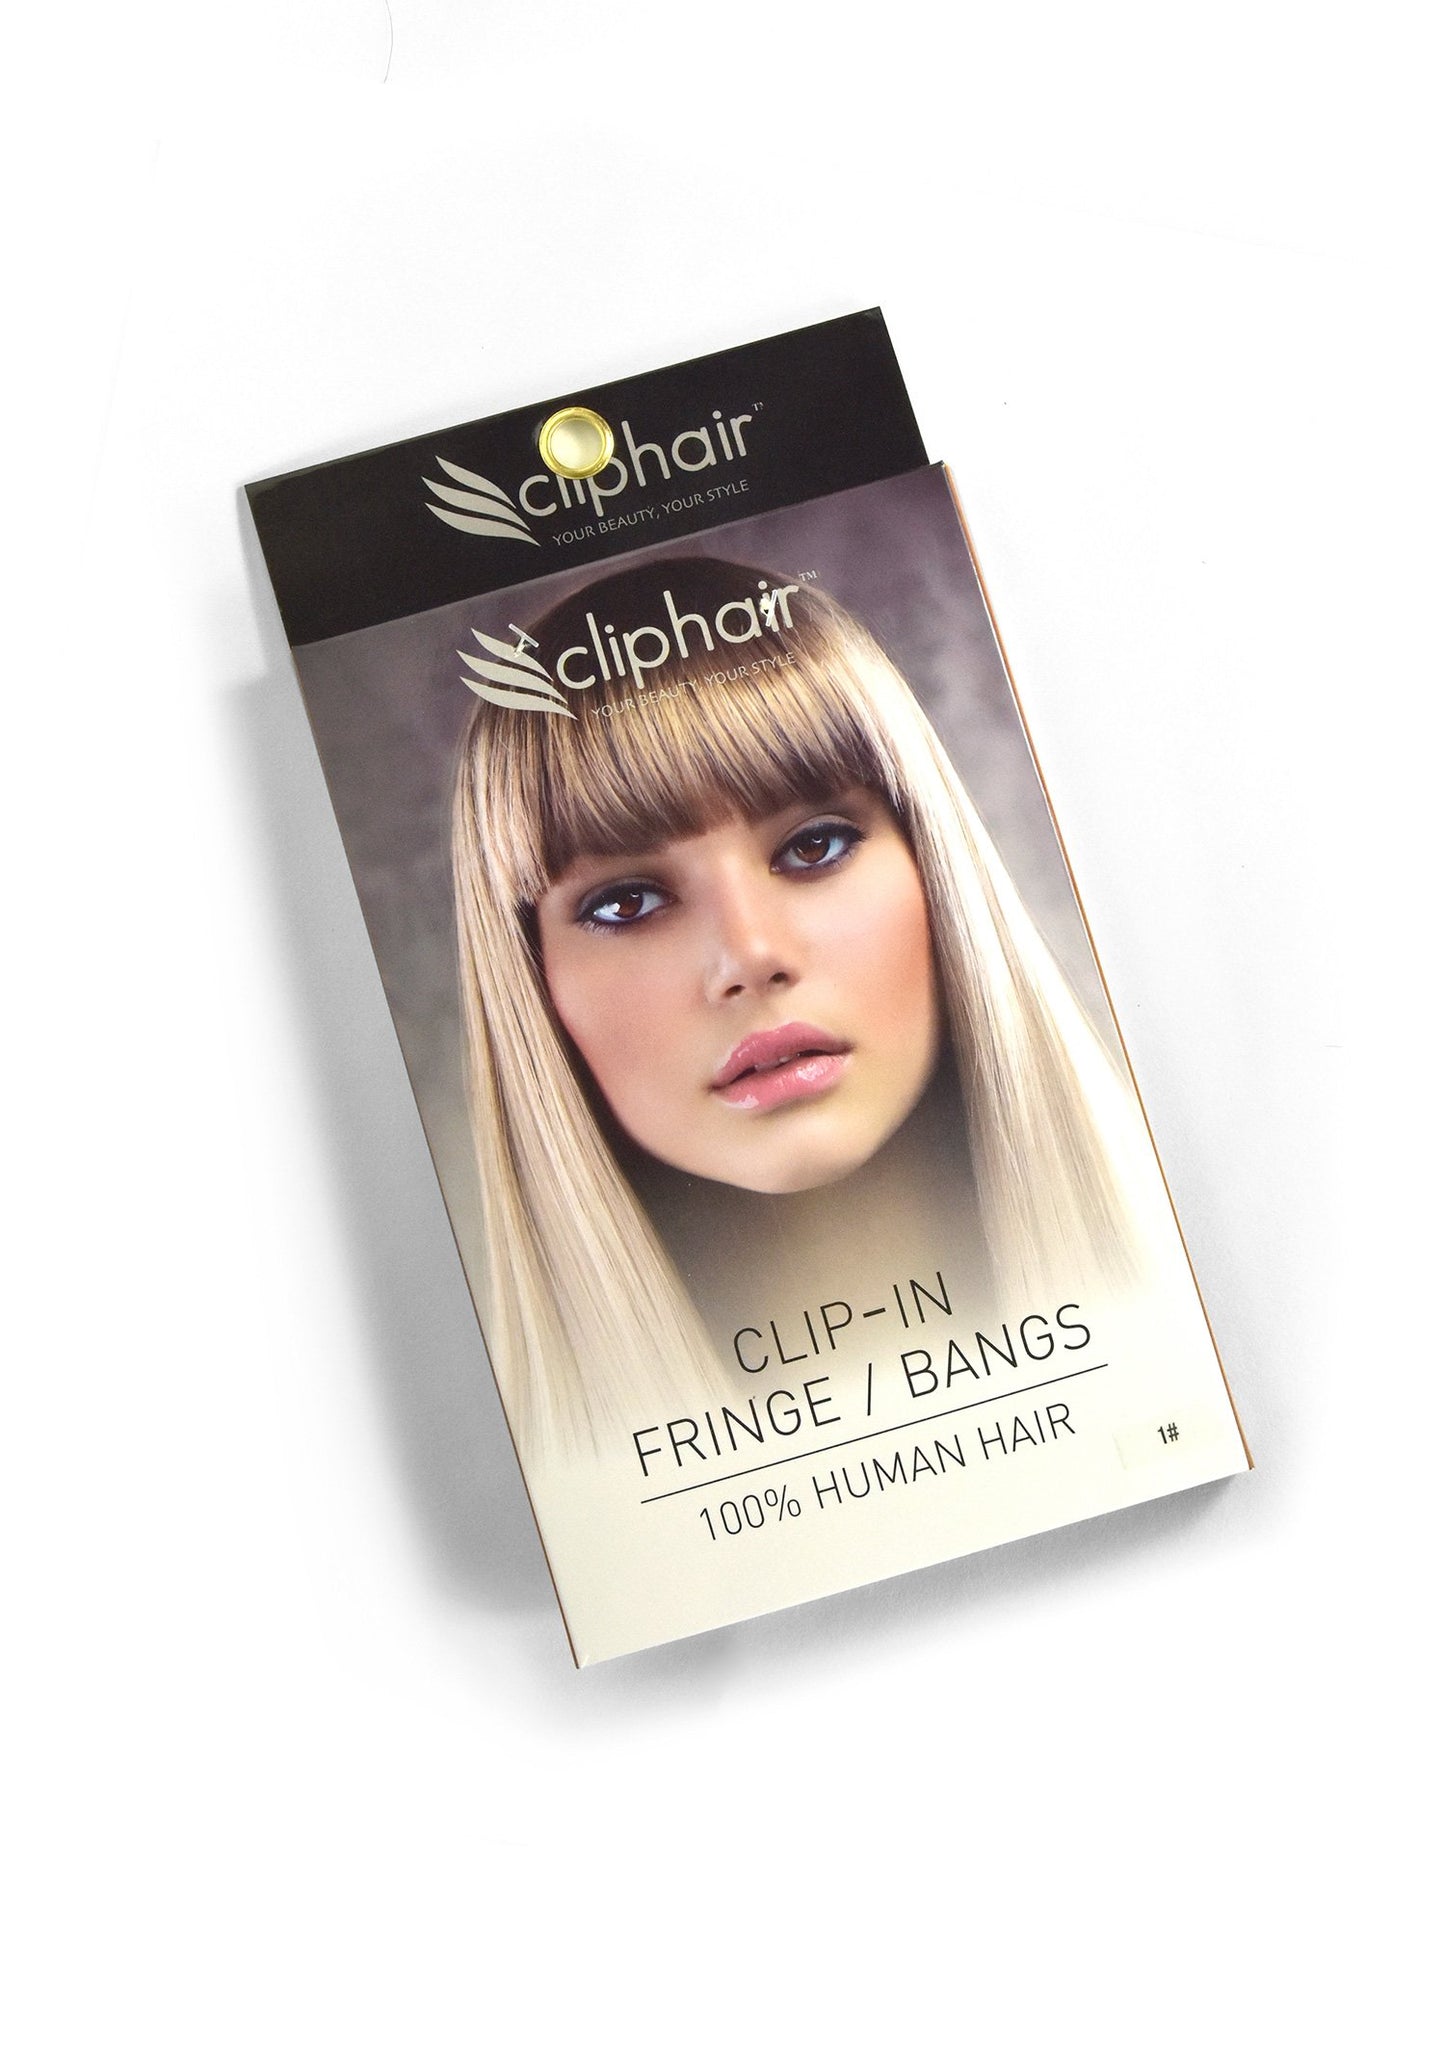 Clip in /on Remy Human Hair Fringe / Bangs - Jet Black (#1)